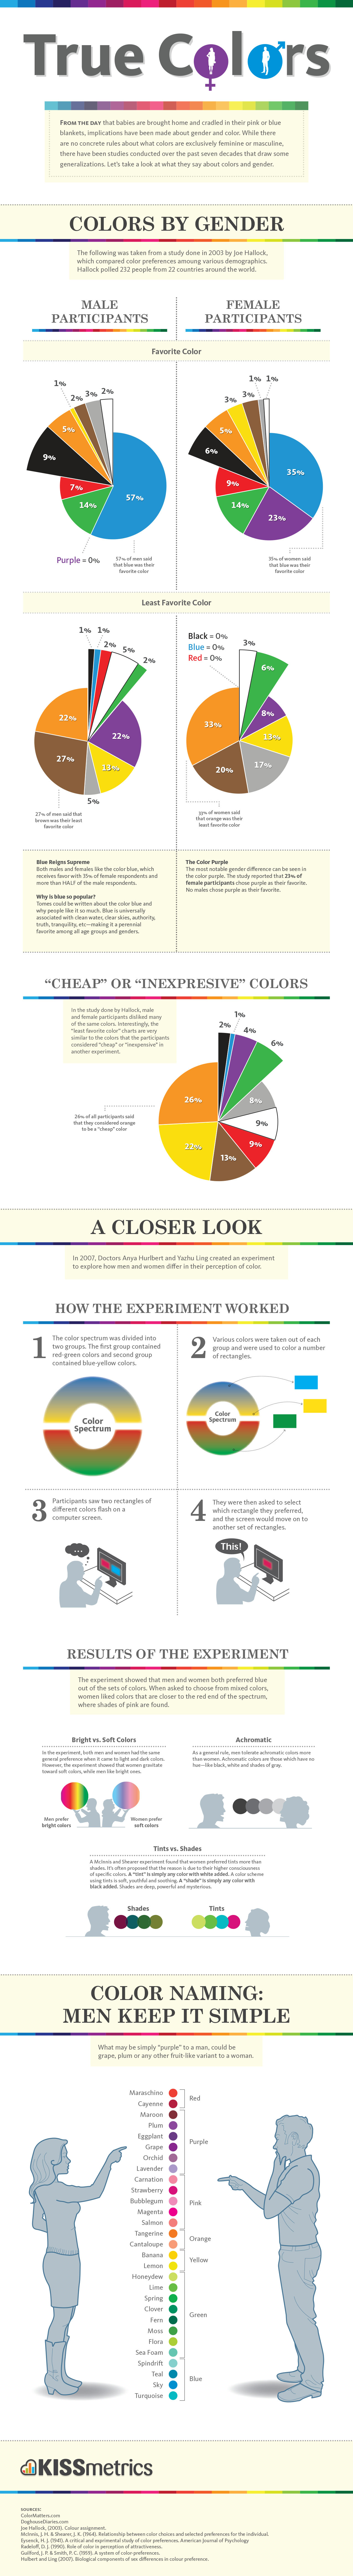 True Colors - A Breakdown of Color Preferences by Gender